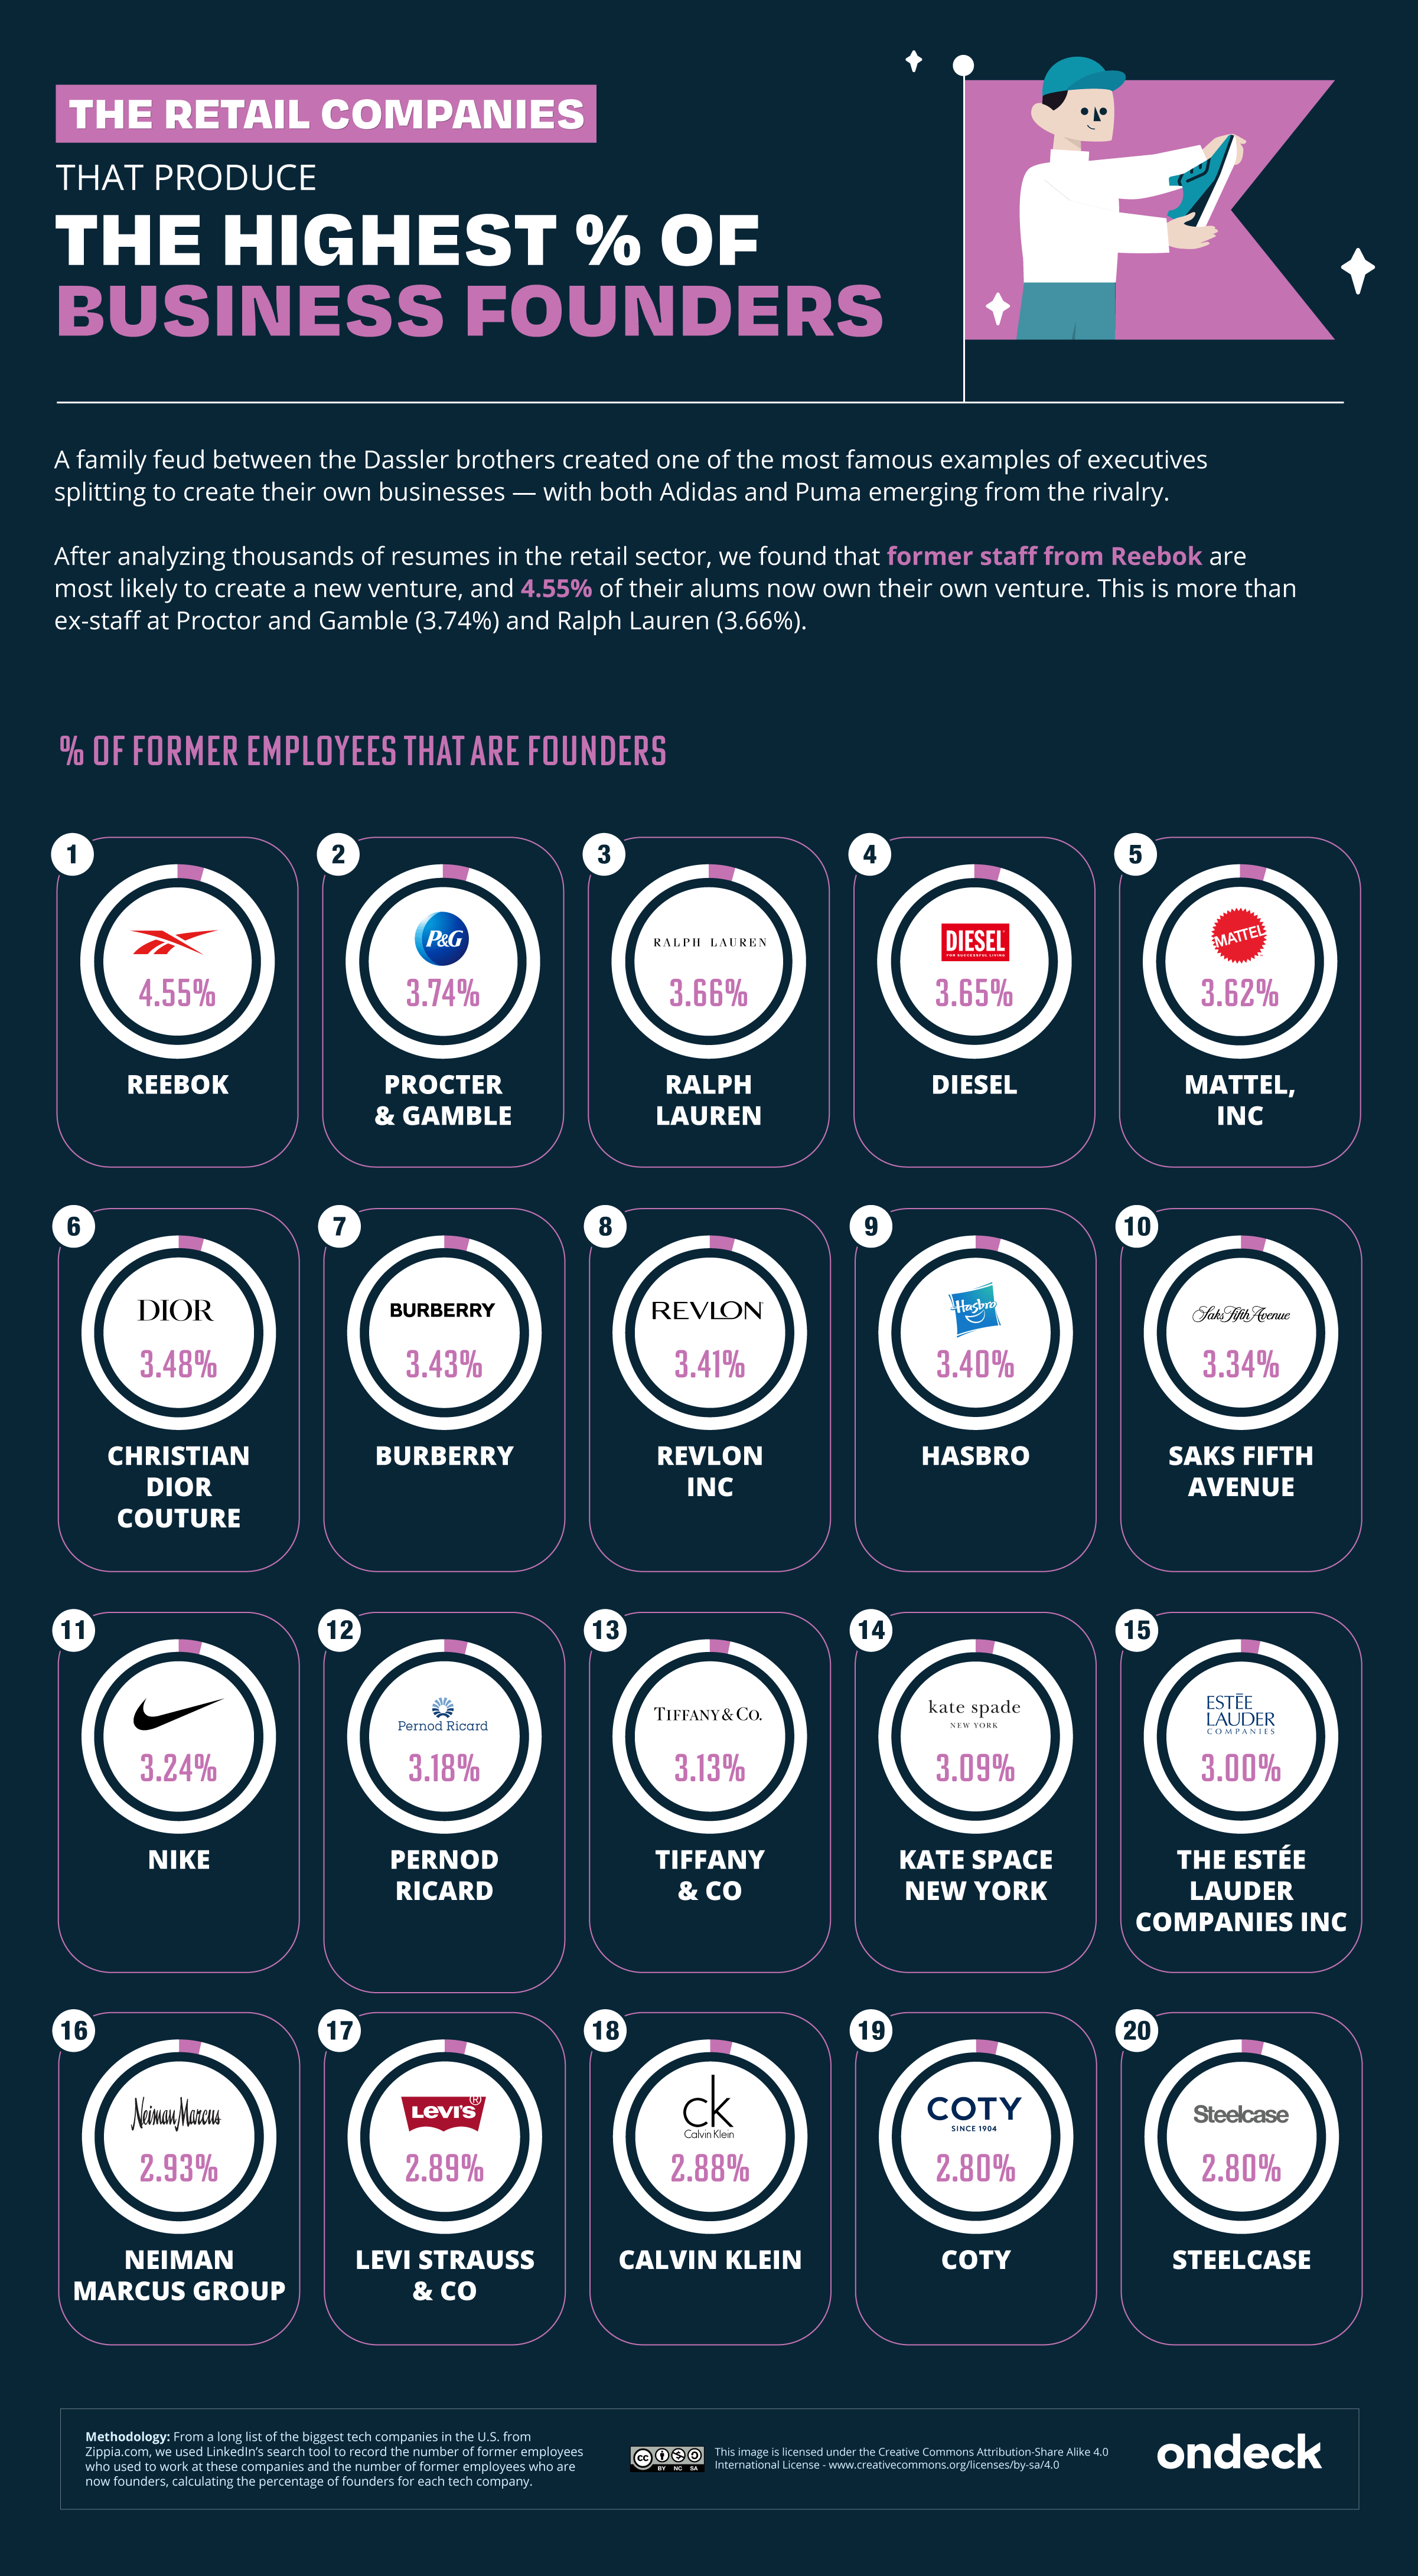 Infographic of the retail companies that produce the highest percentage of business founders